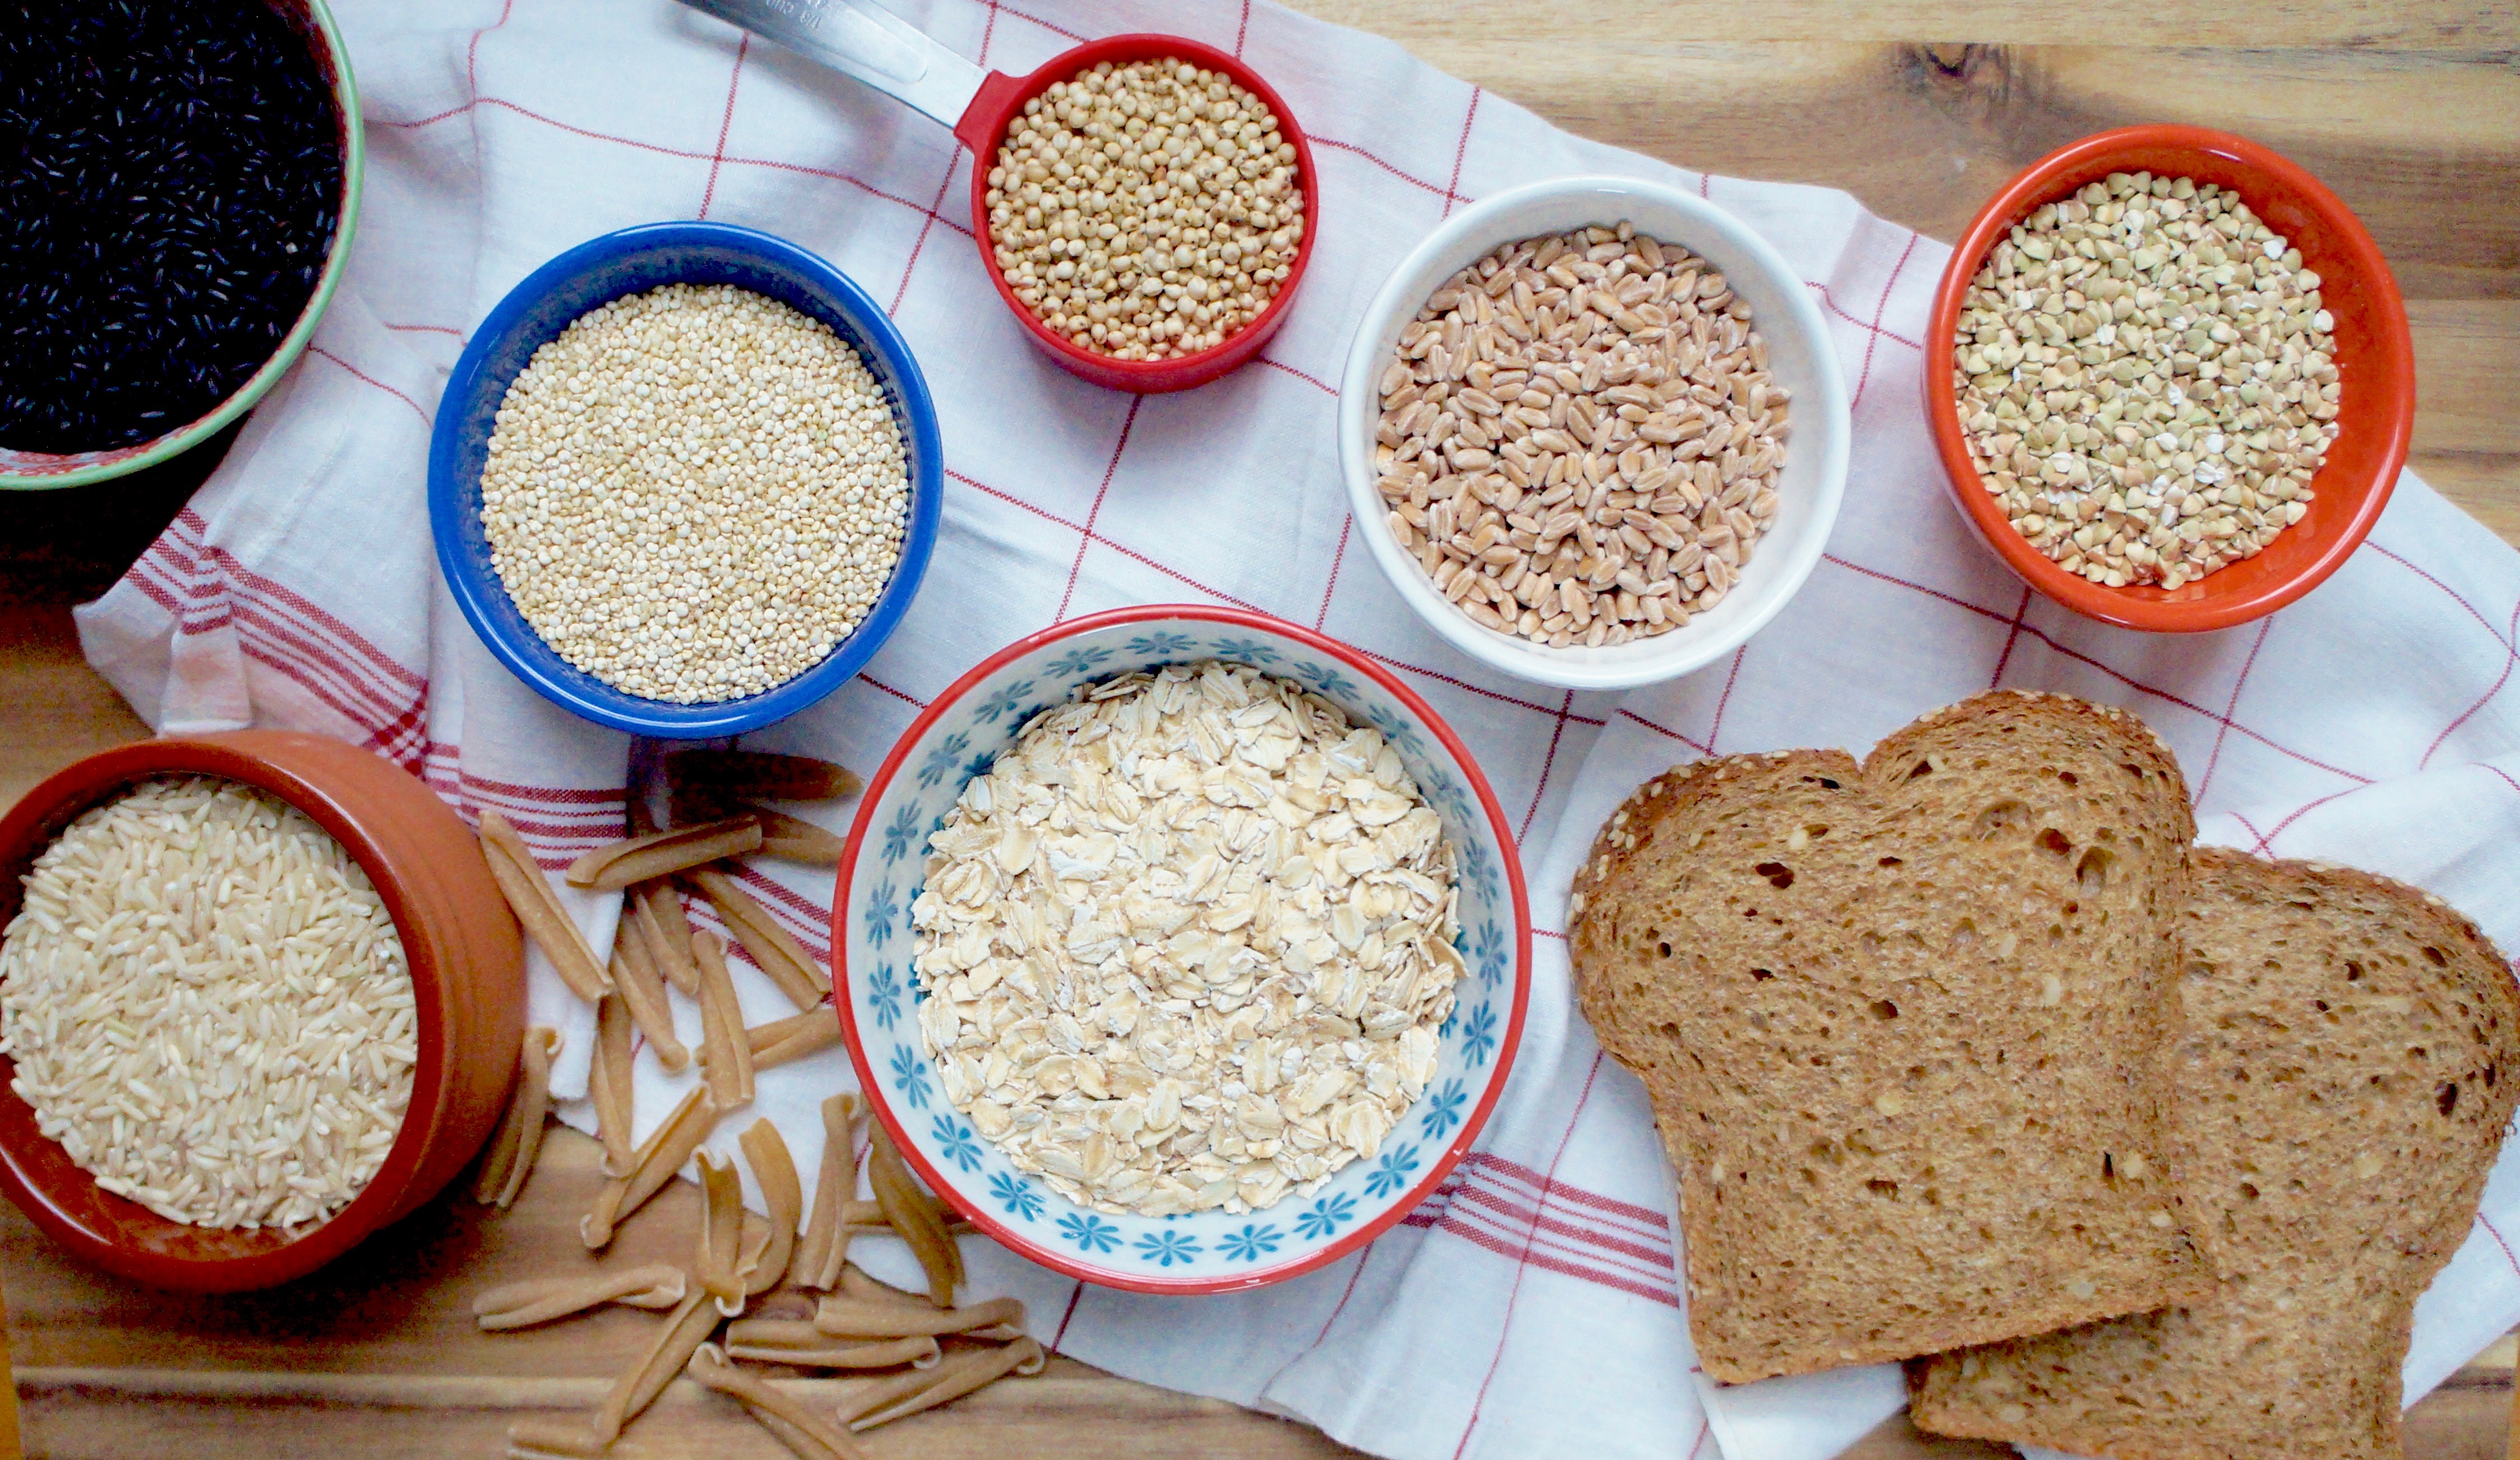 Assorted whole grains - dry